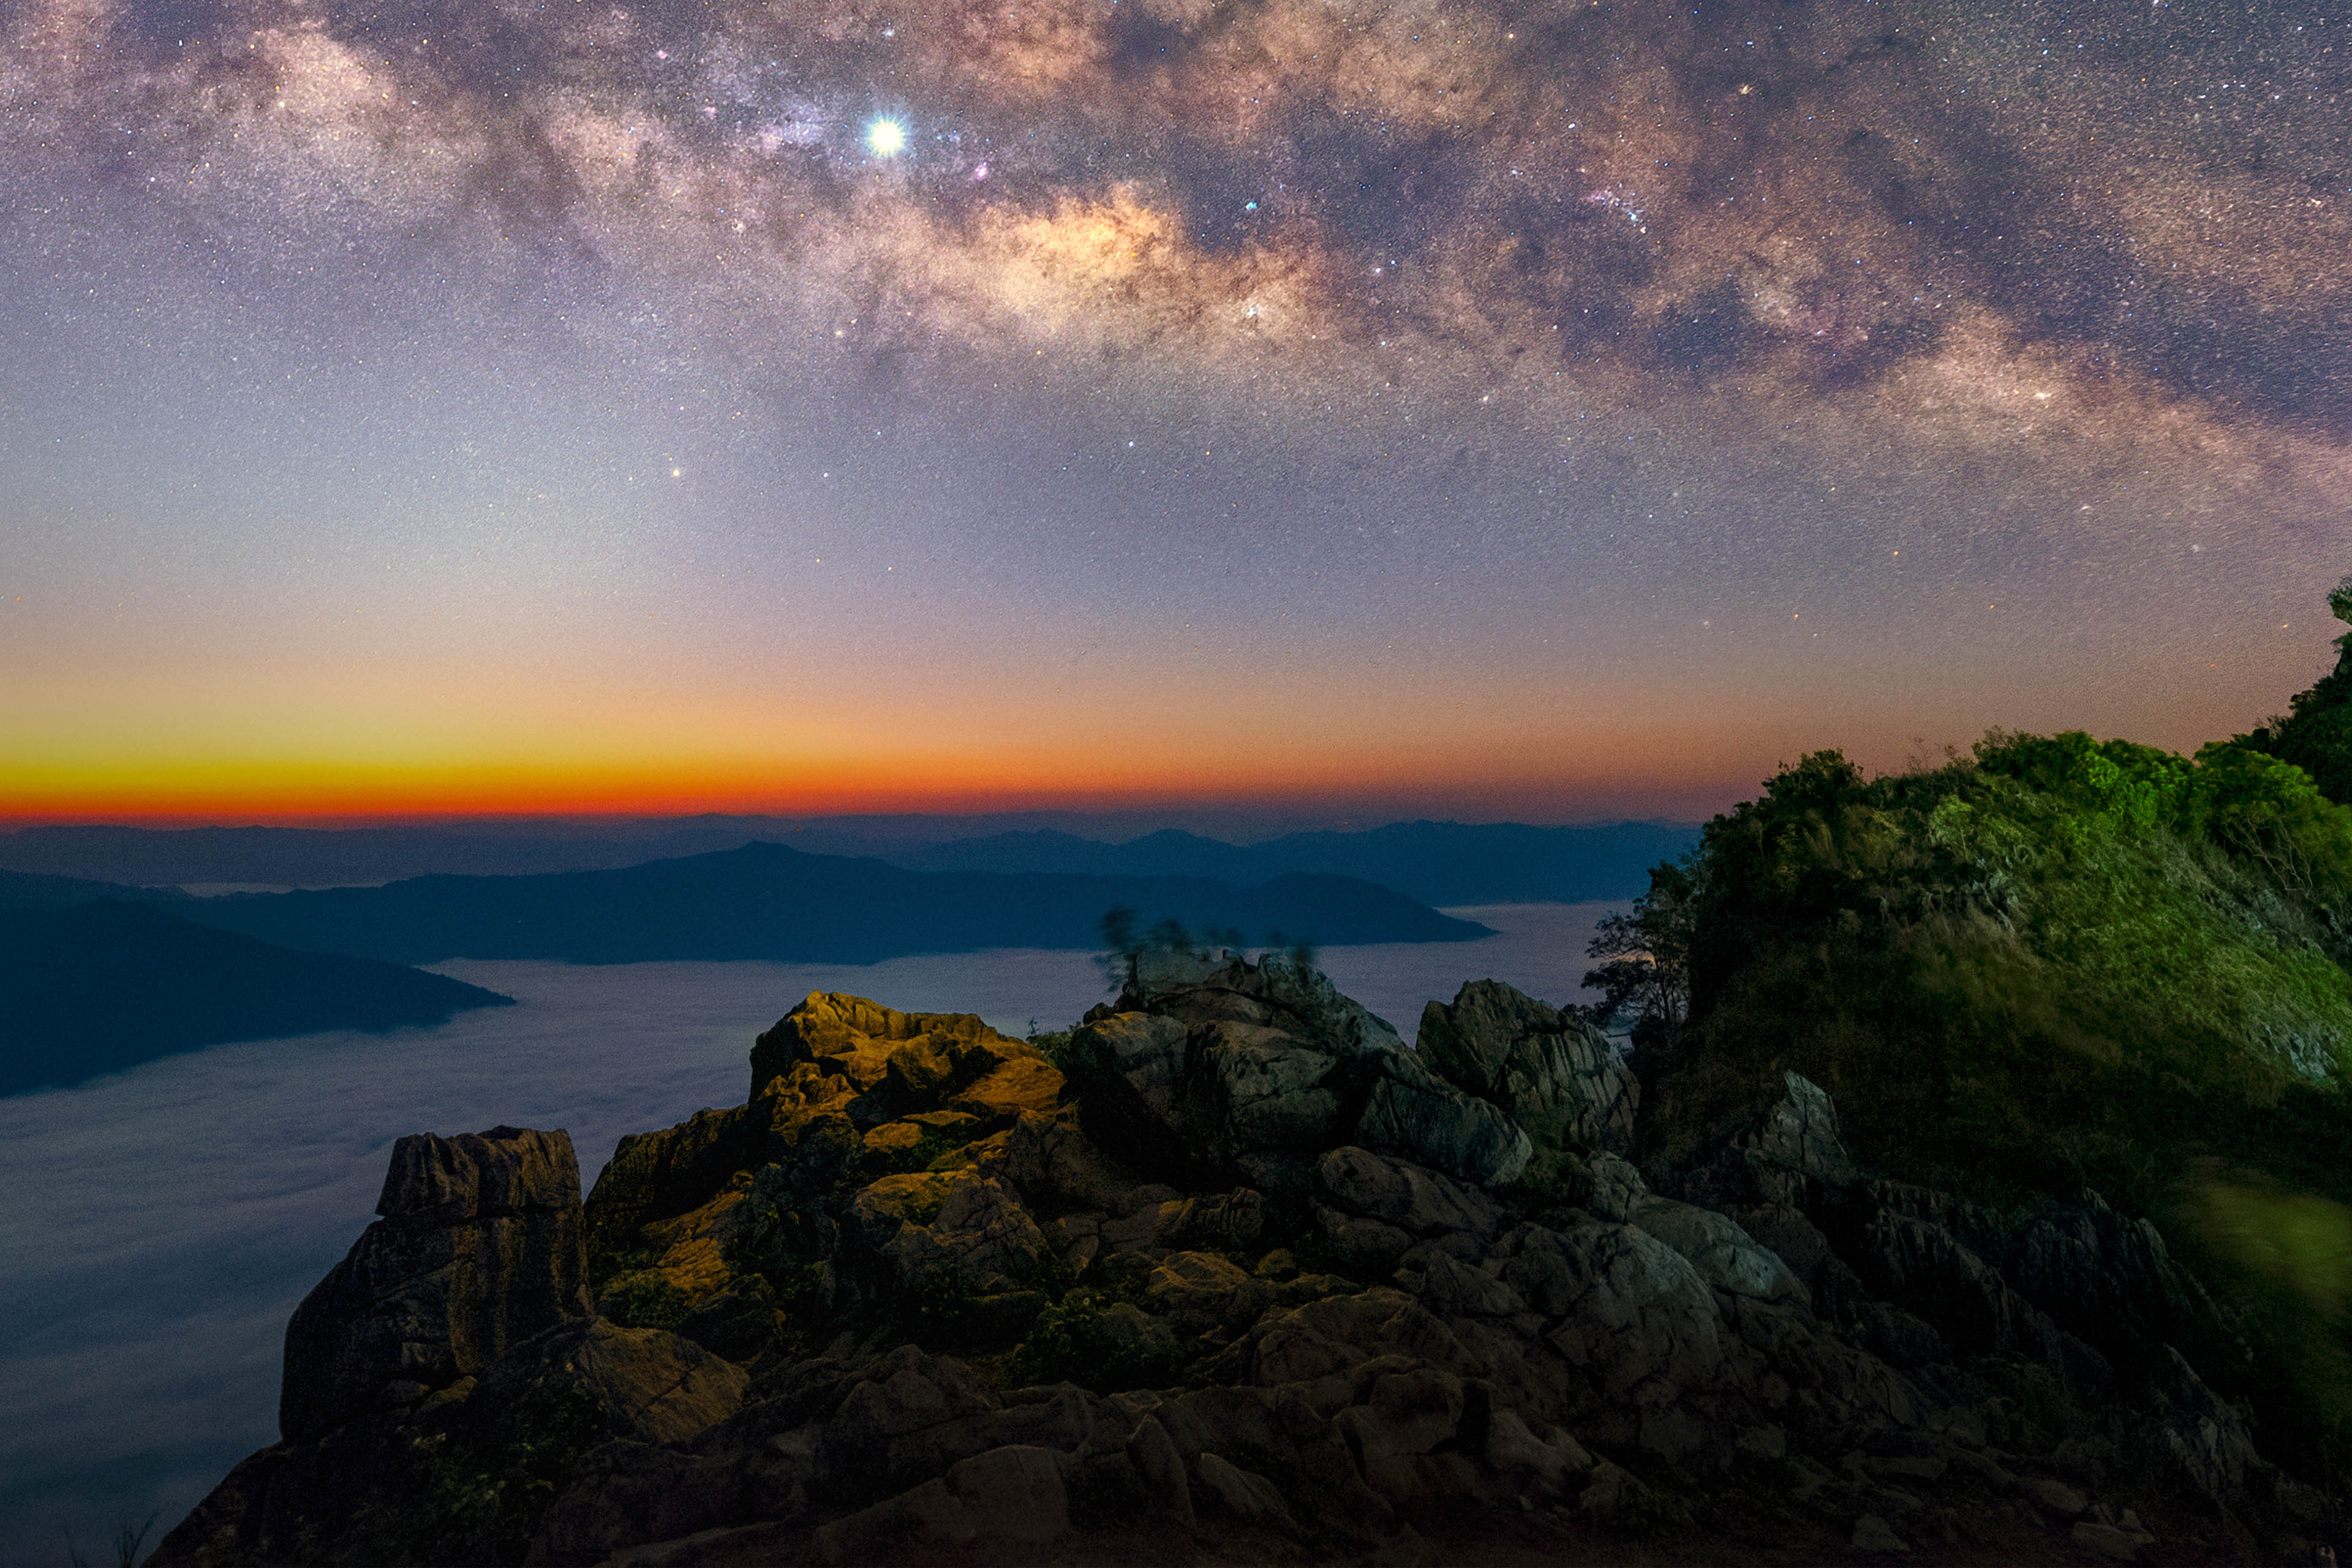 Milky Way with zodiacal light and fog rising in the morning at Doi Pha Tang